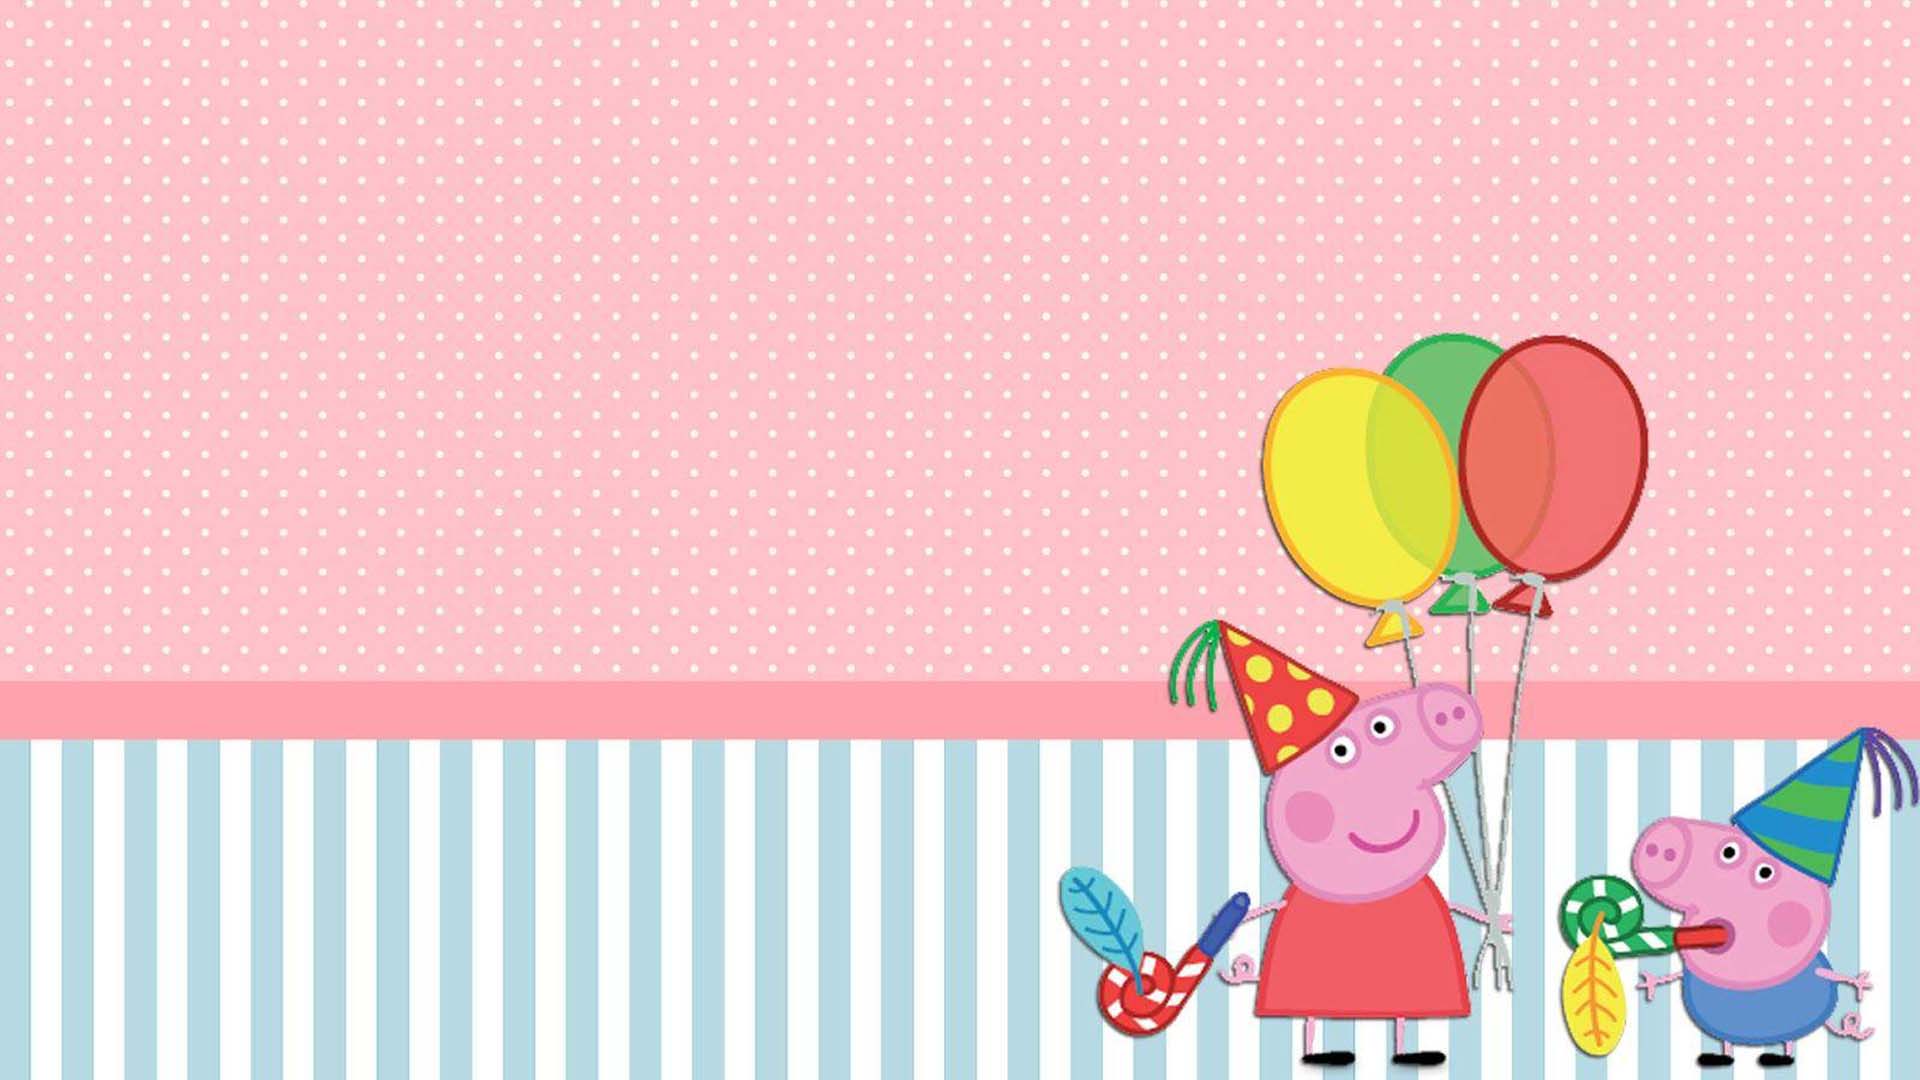 Peppa pig and george pig having balloons in hand with dotted Wallpaper 2K anime